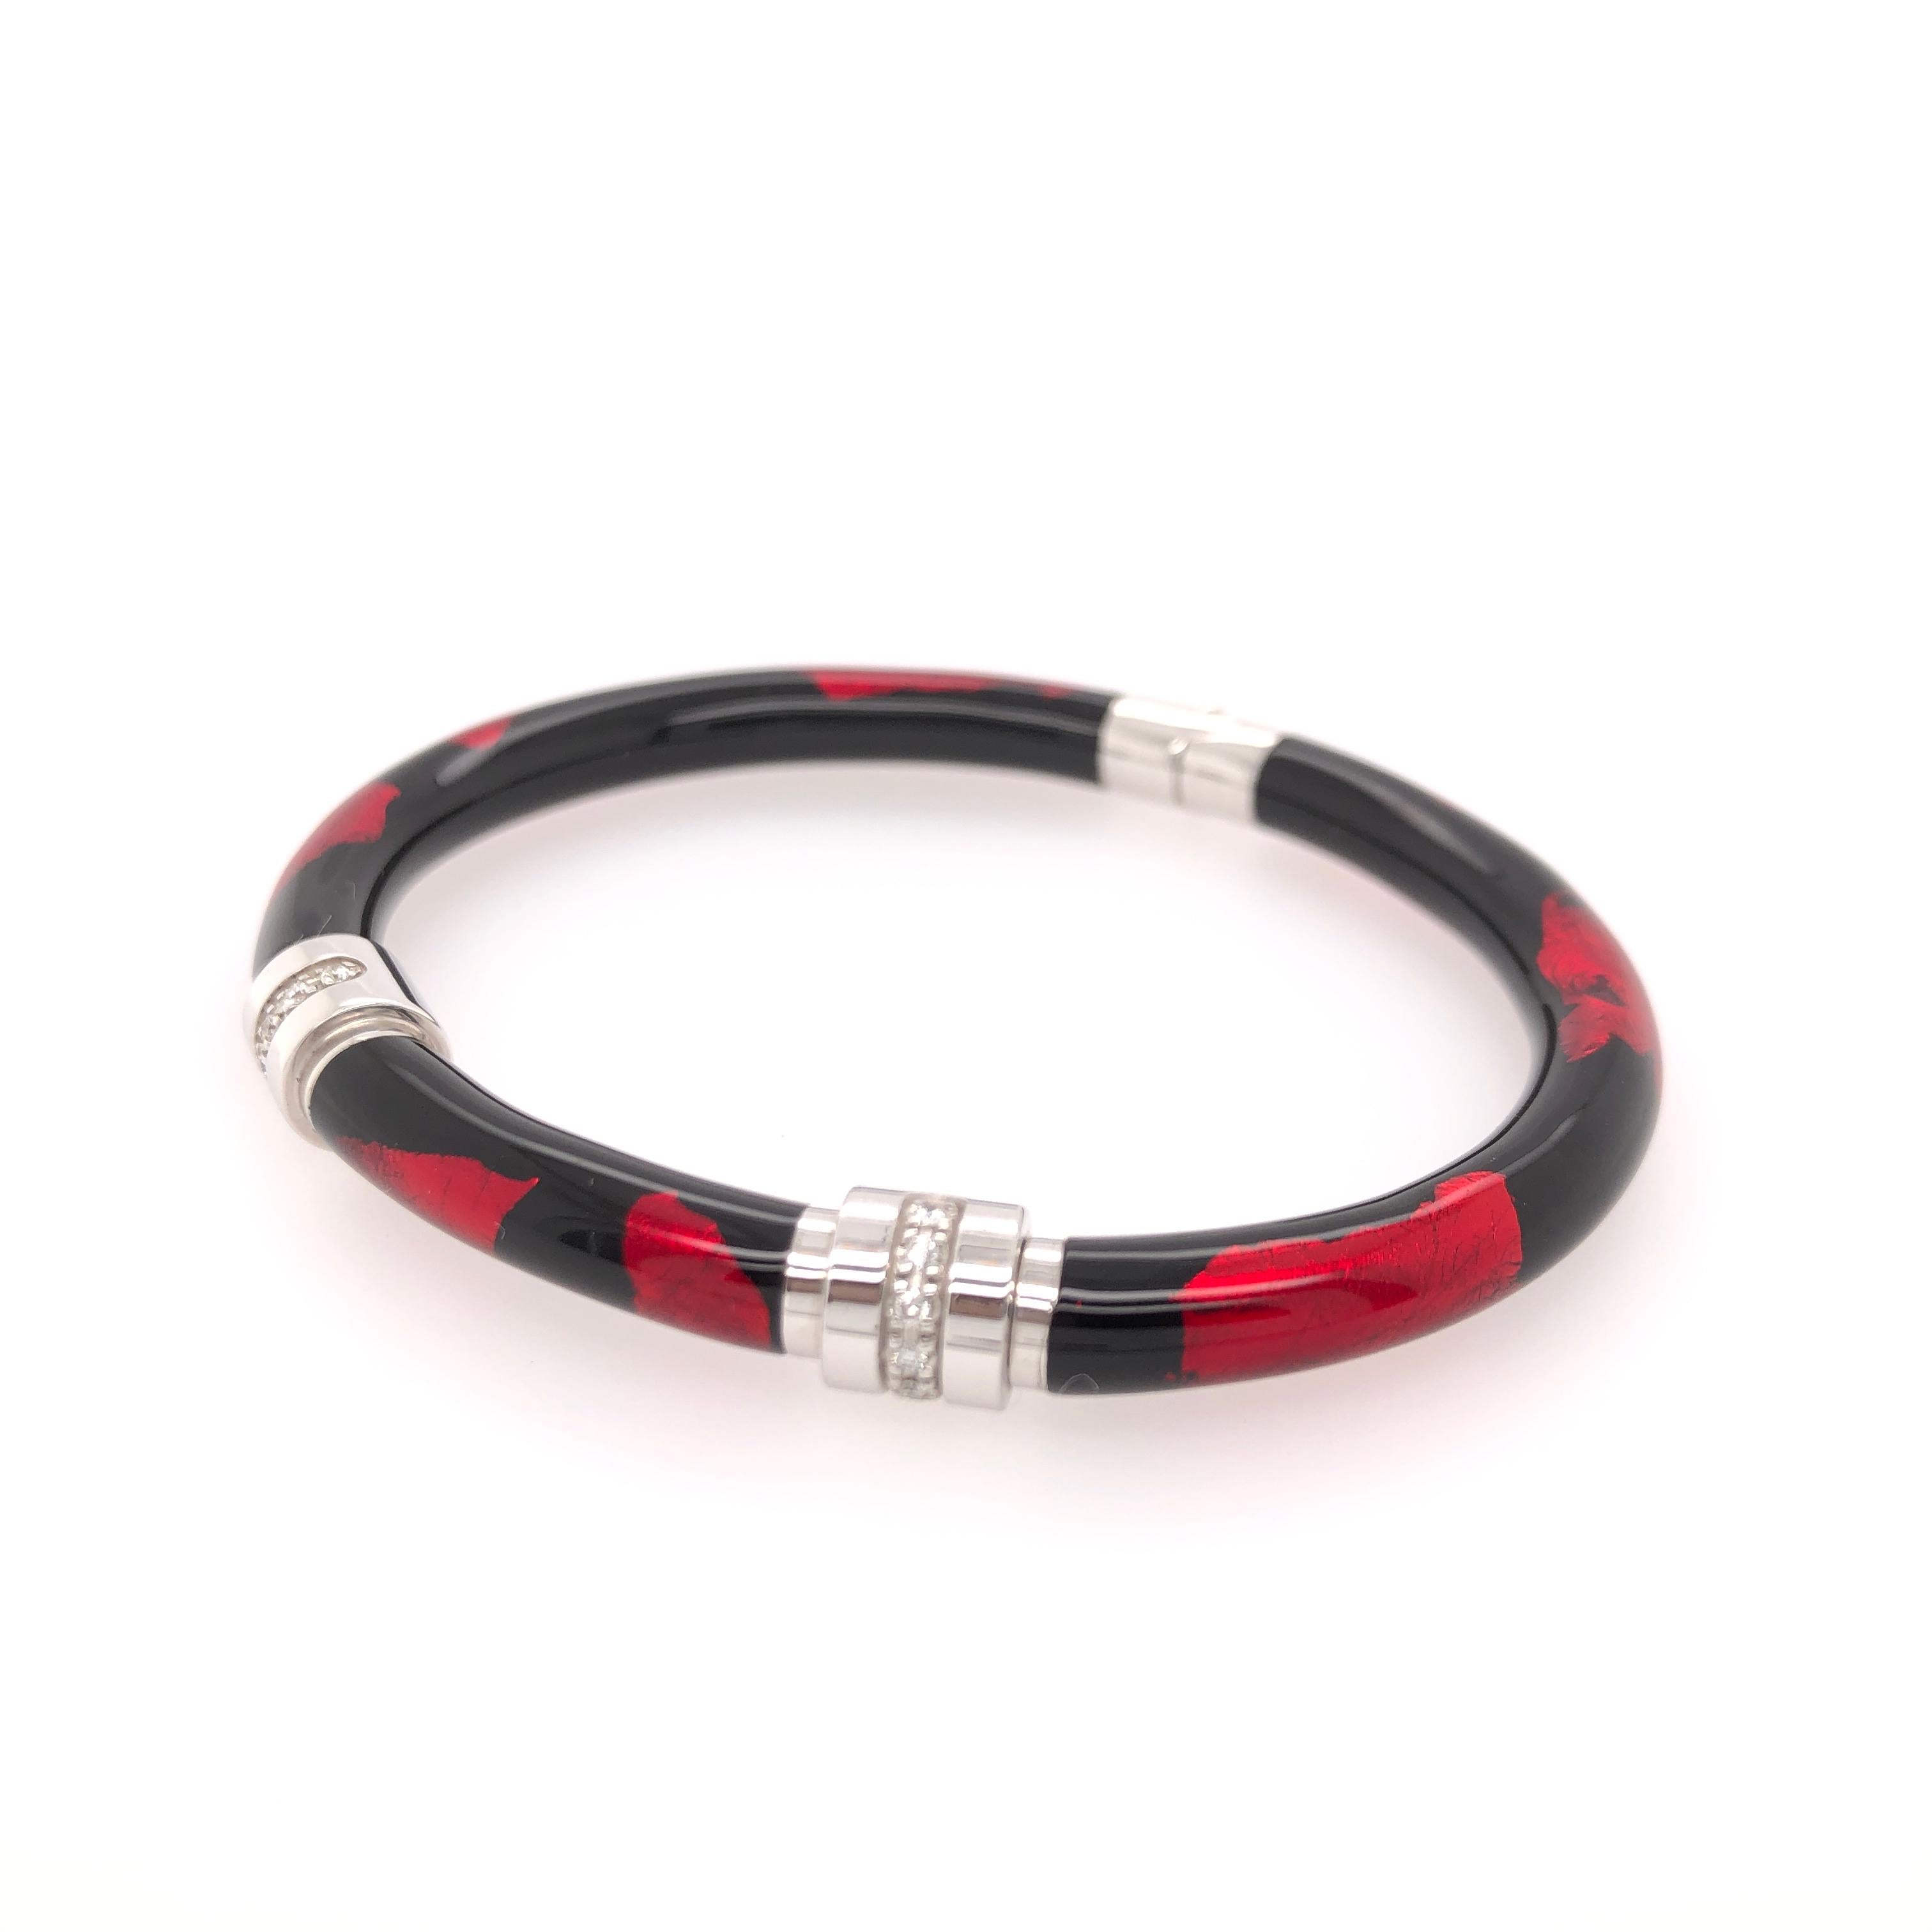 SOHO sterling silver and enamel red and black foliage bangle with two diamond stations.

Total estimated diamond carat weight: 0.32 CT

Stamped: SOHO SLVR